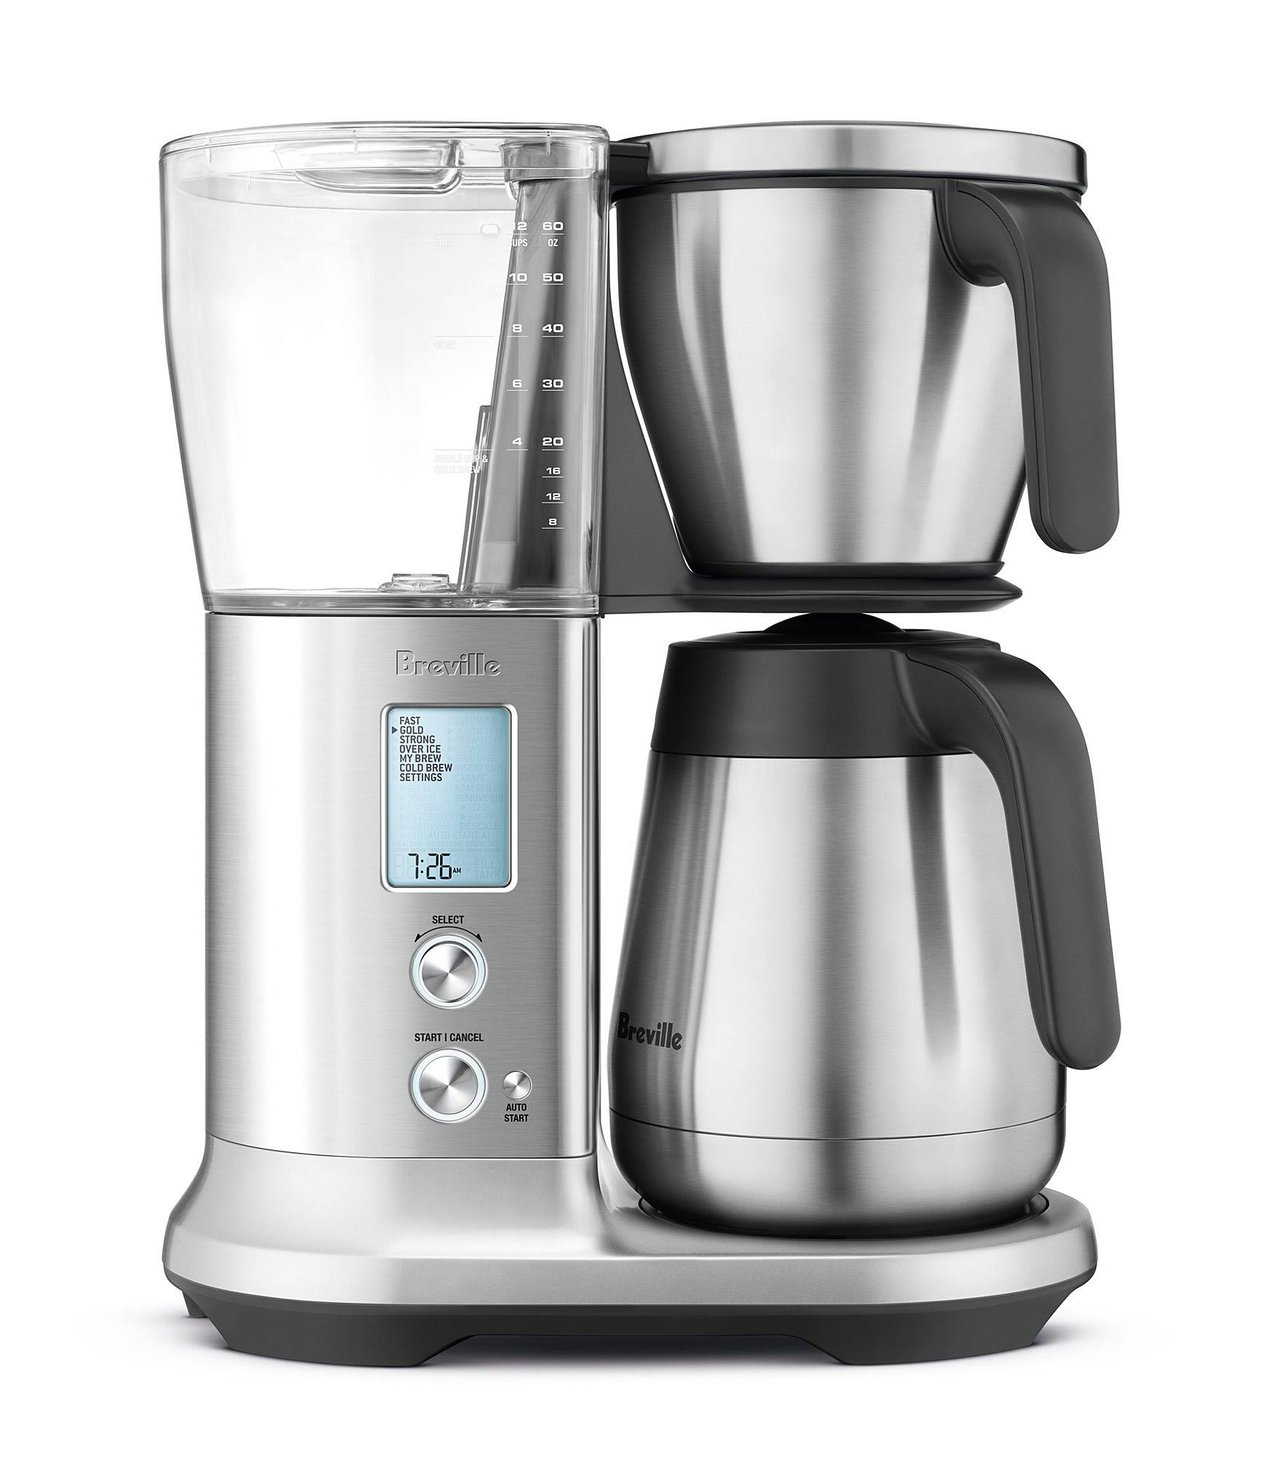 7 The 12-Cup Precision Hot Beverage Maker